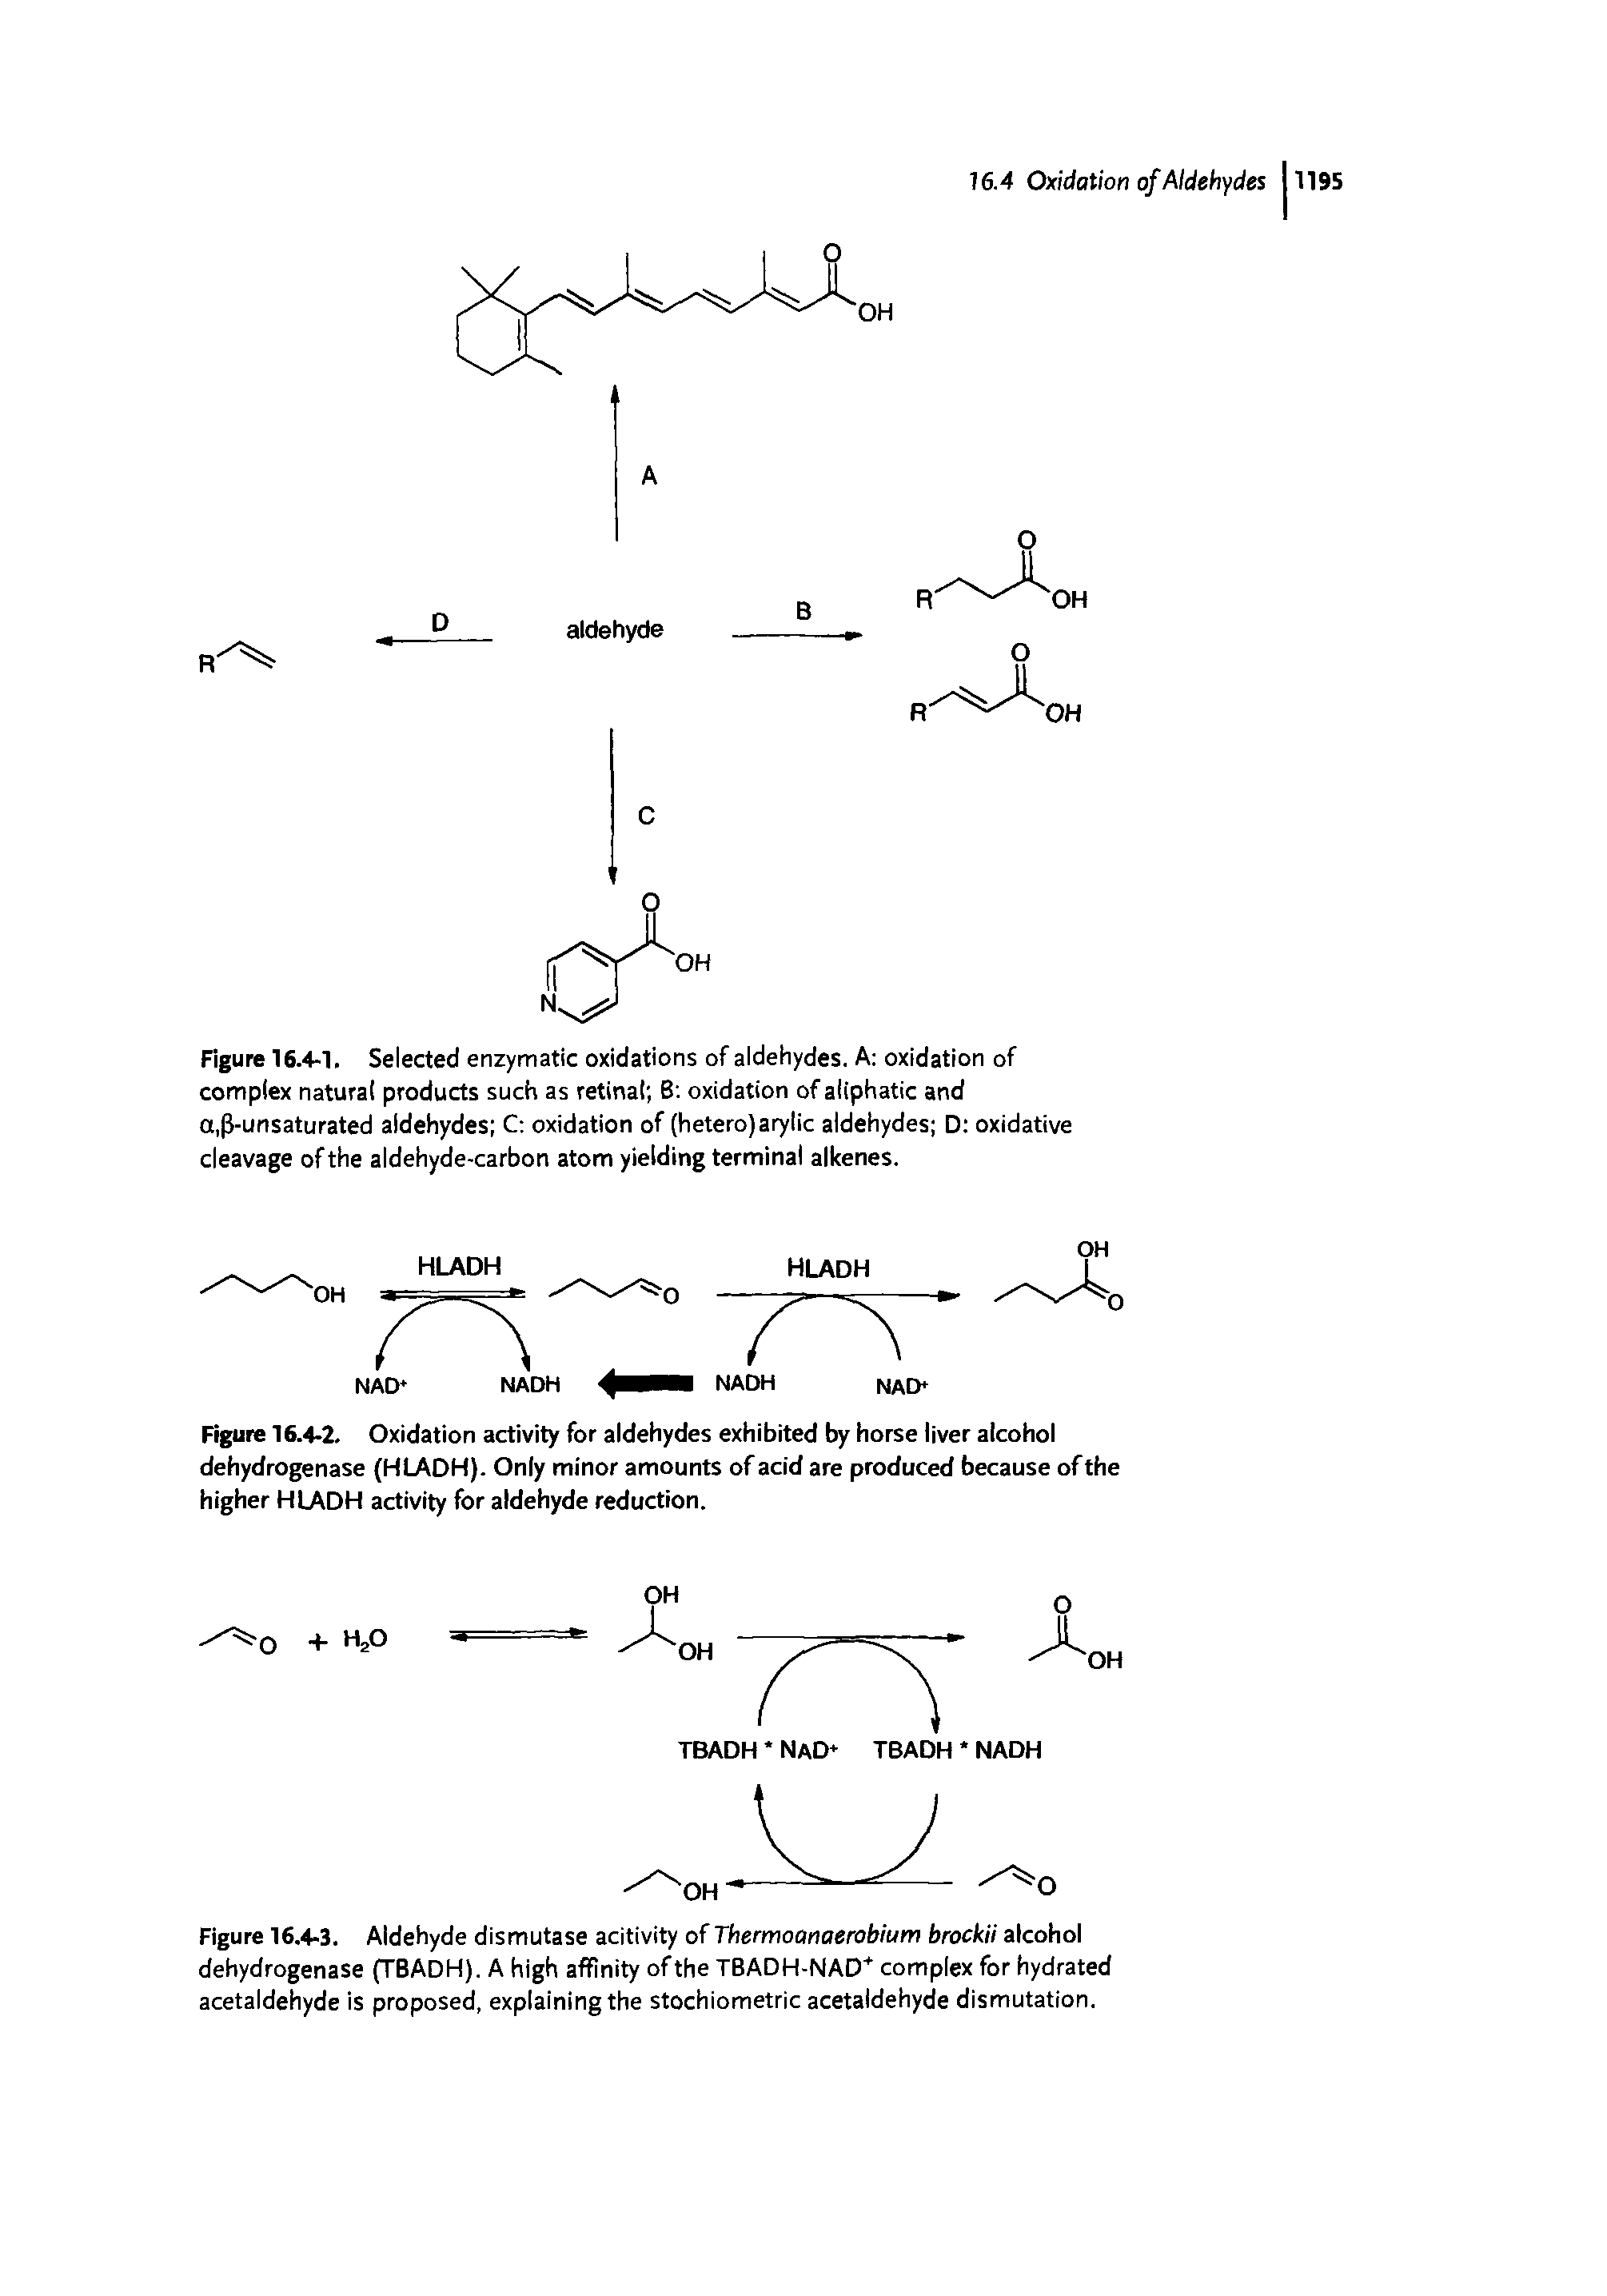 Figure 16.4-2. Oxidation activity for aldehydes exhibited by horse liver alcohol dehydrogenase (HLADH). Only minor amounts of acid are produced because of the higher HLADH activity for aldehyde reduction.